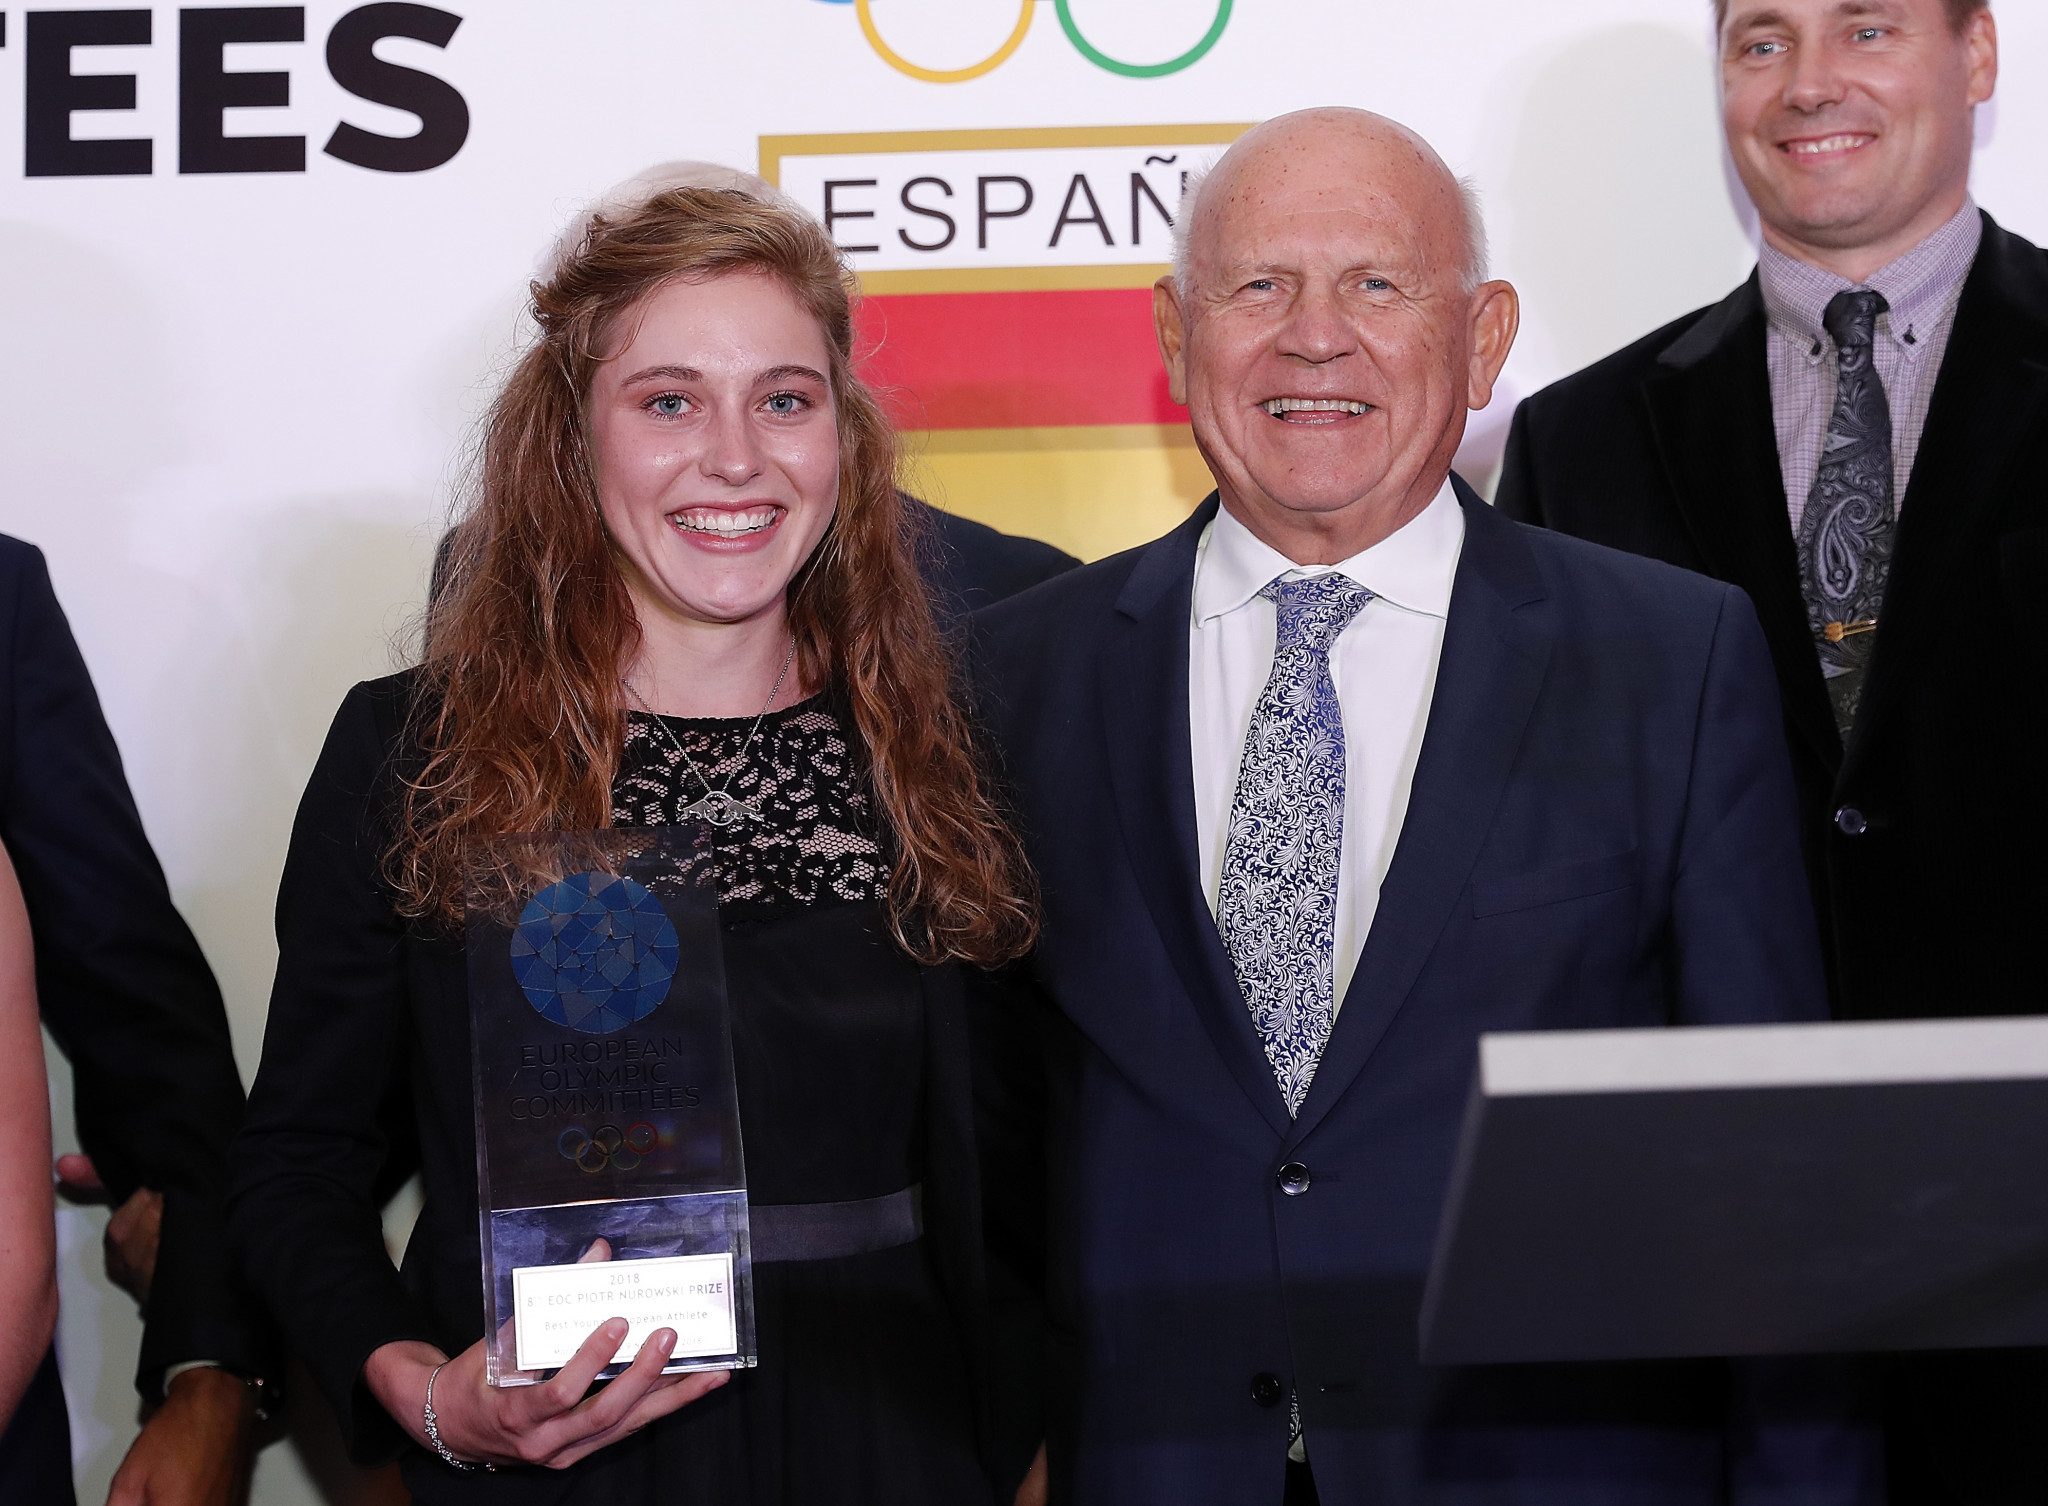 EOC issue call for Best Young European Athlete award nominations